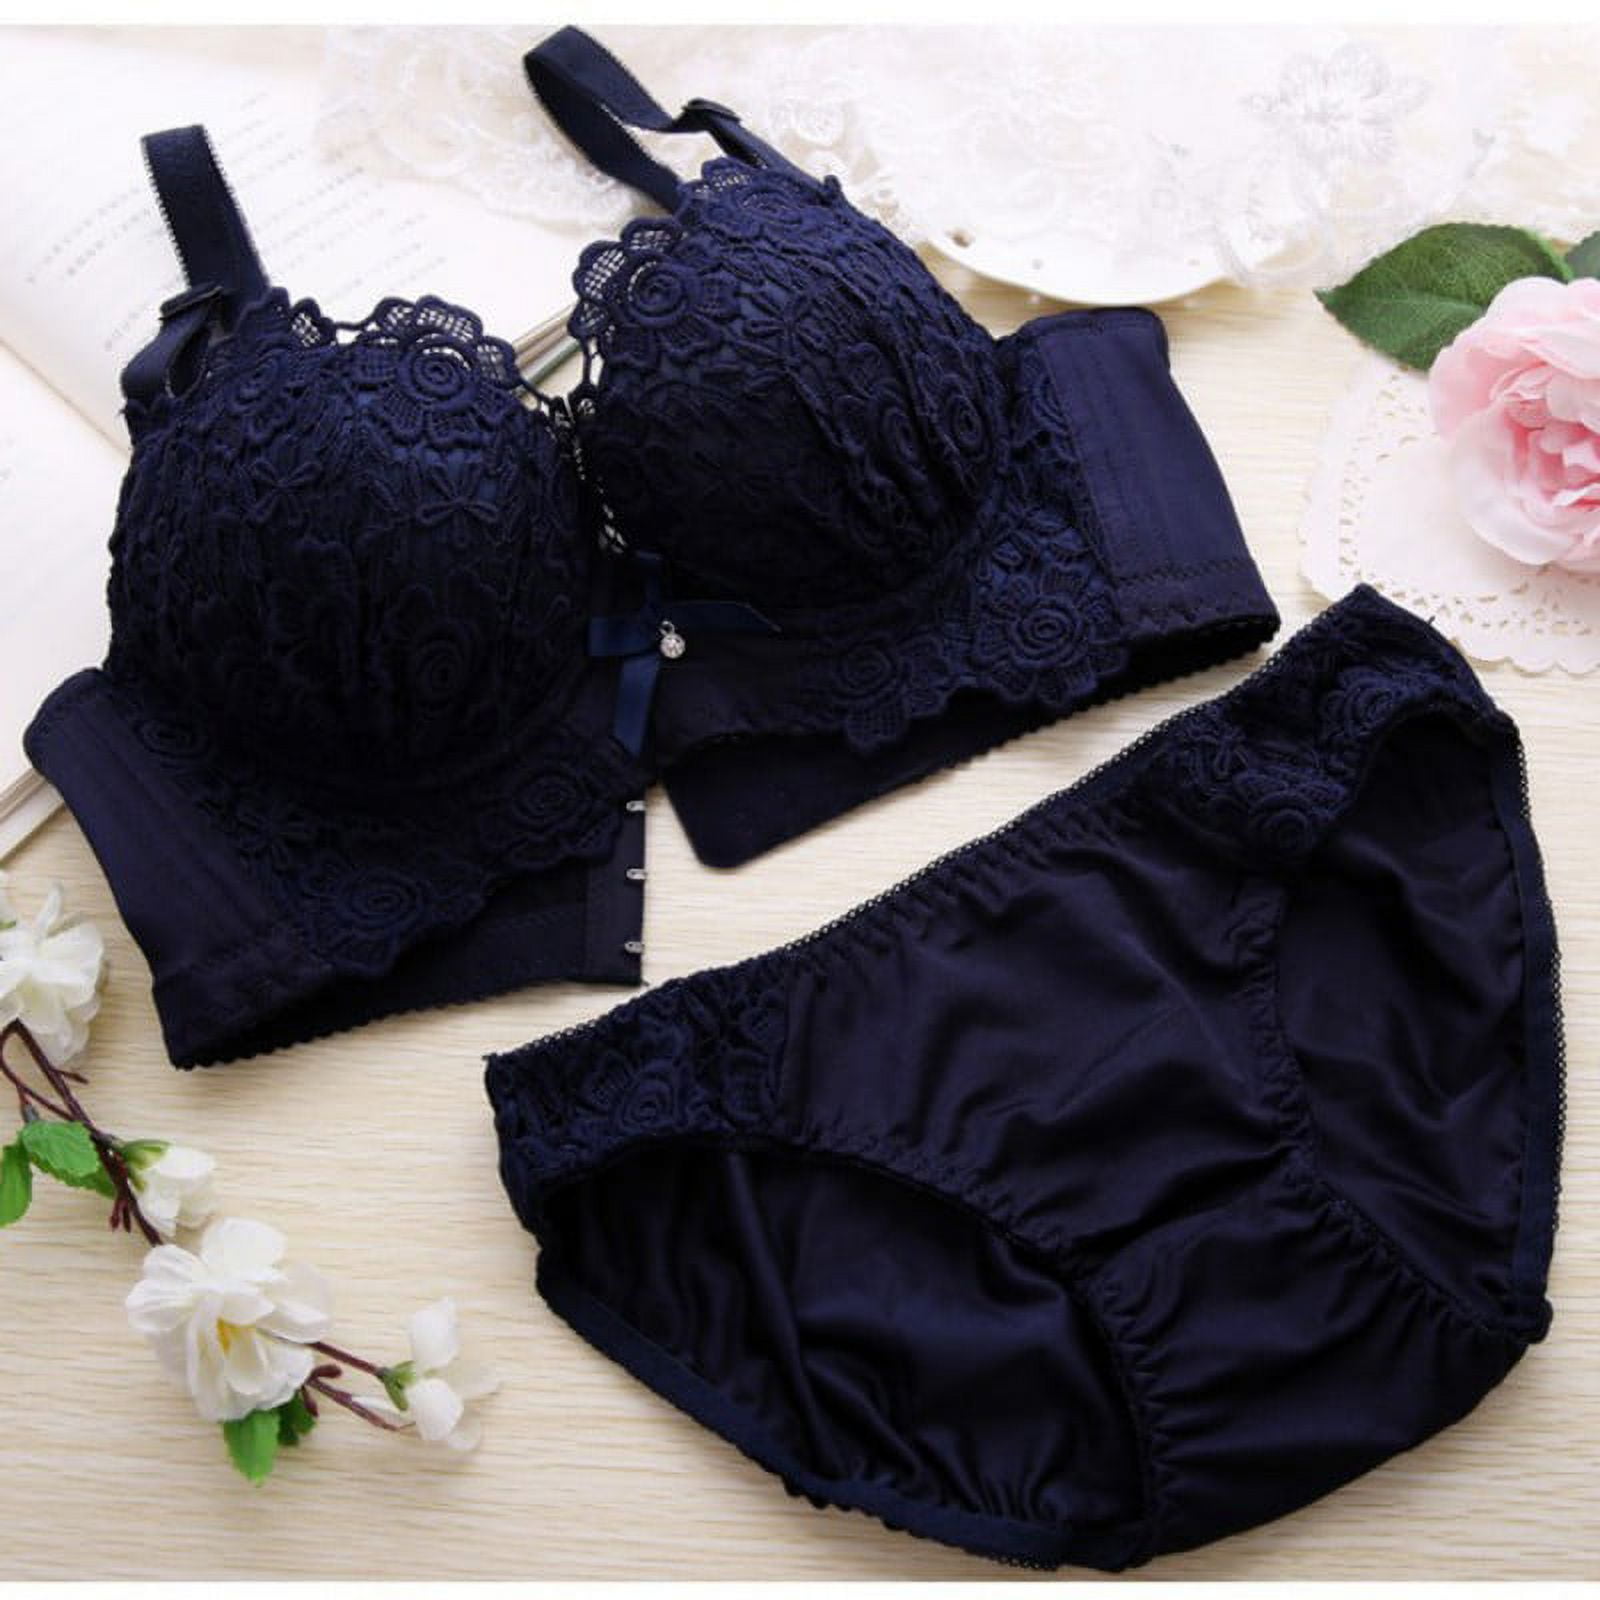 Ladies Sexy Panty Bra Sets Stylish Push Up Triangle Bra Underwear Sets Panties  Bra Sets $6.13 - Wholesale China Women's Bra Underwear Sets at factory  prices from Quanzhou Junyuan Commercial And Trading